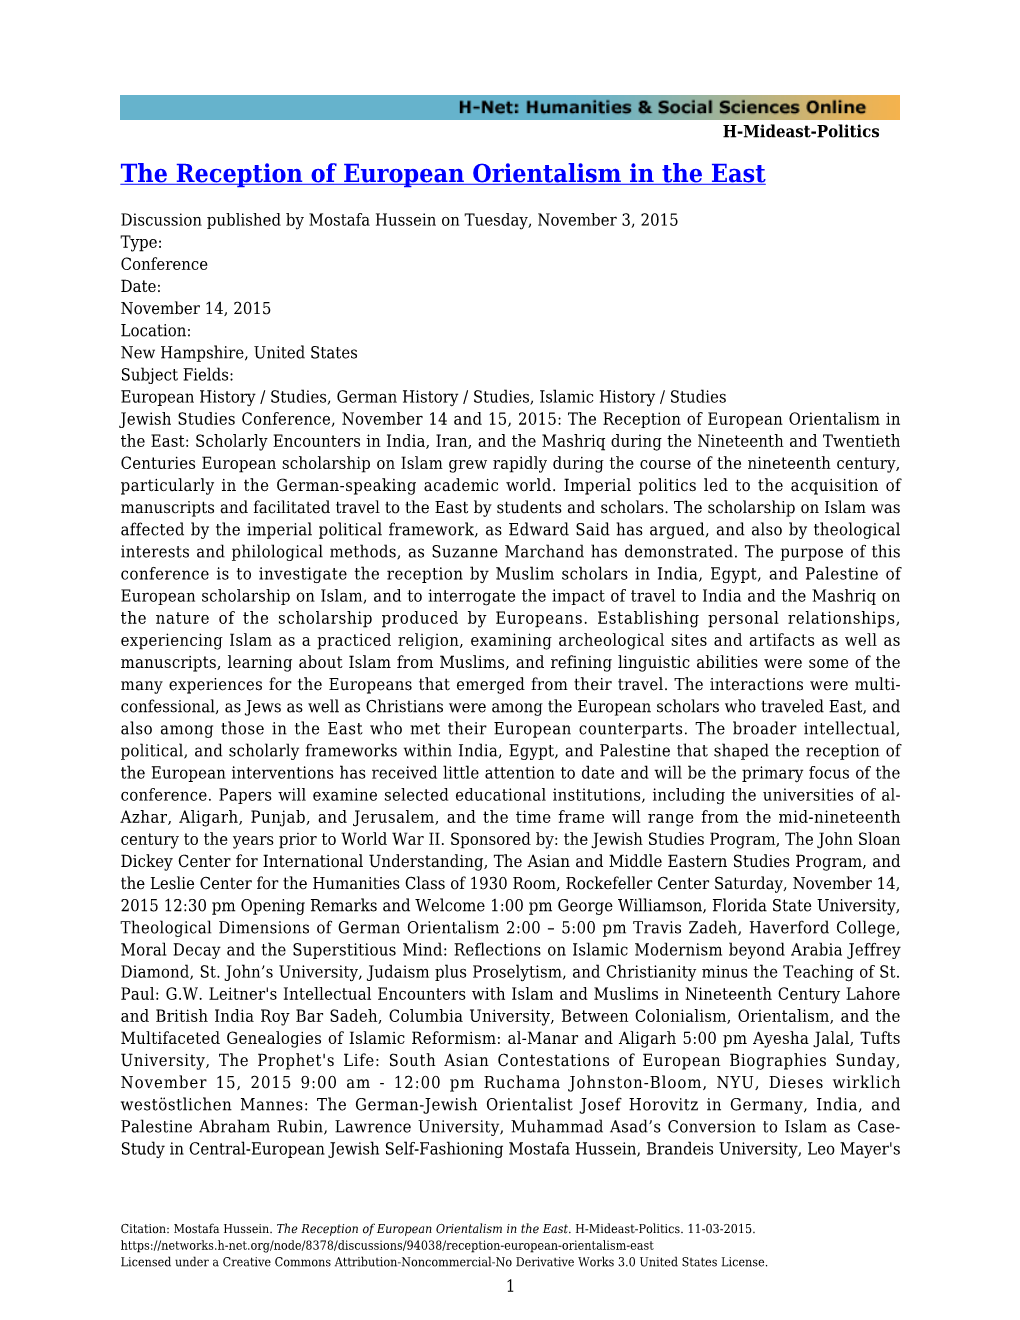 The Reception of European Orientalism in the East